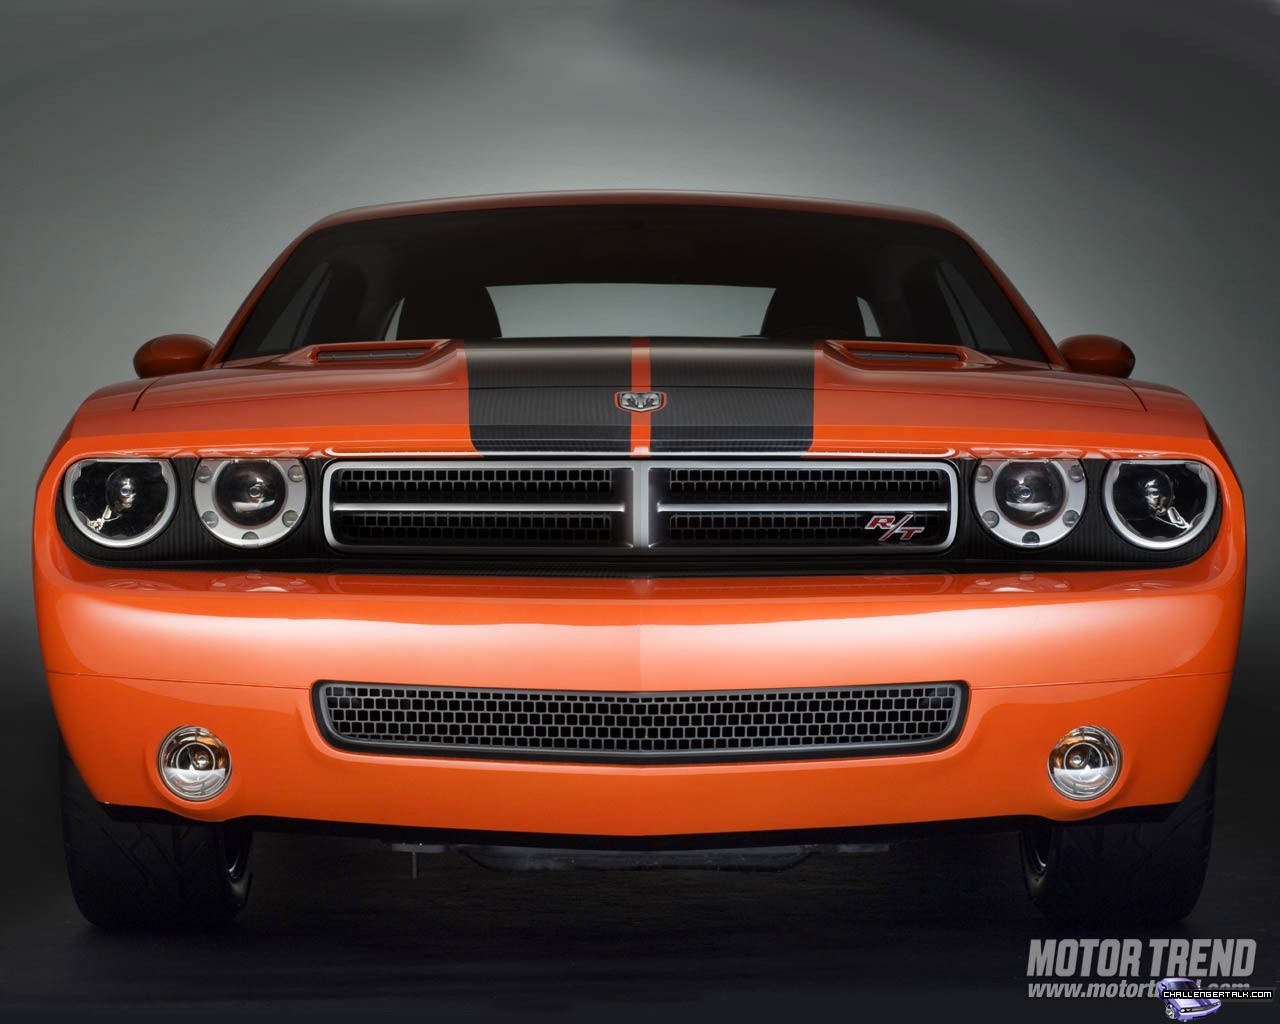 the 'Dodge Challenger Concept', as the public viewing days begin at the